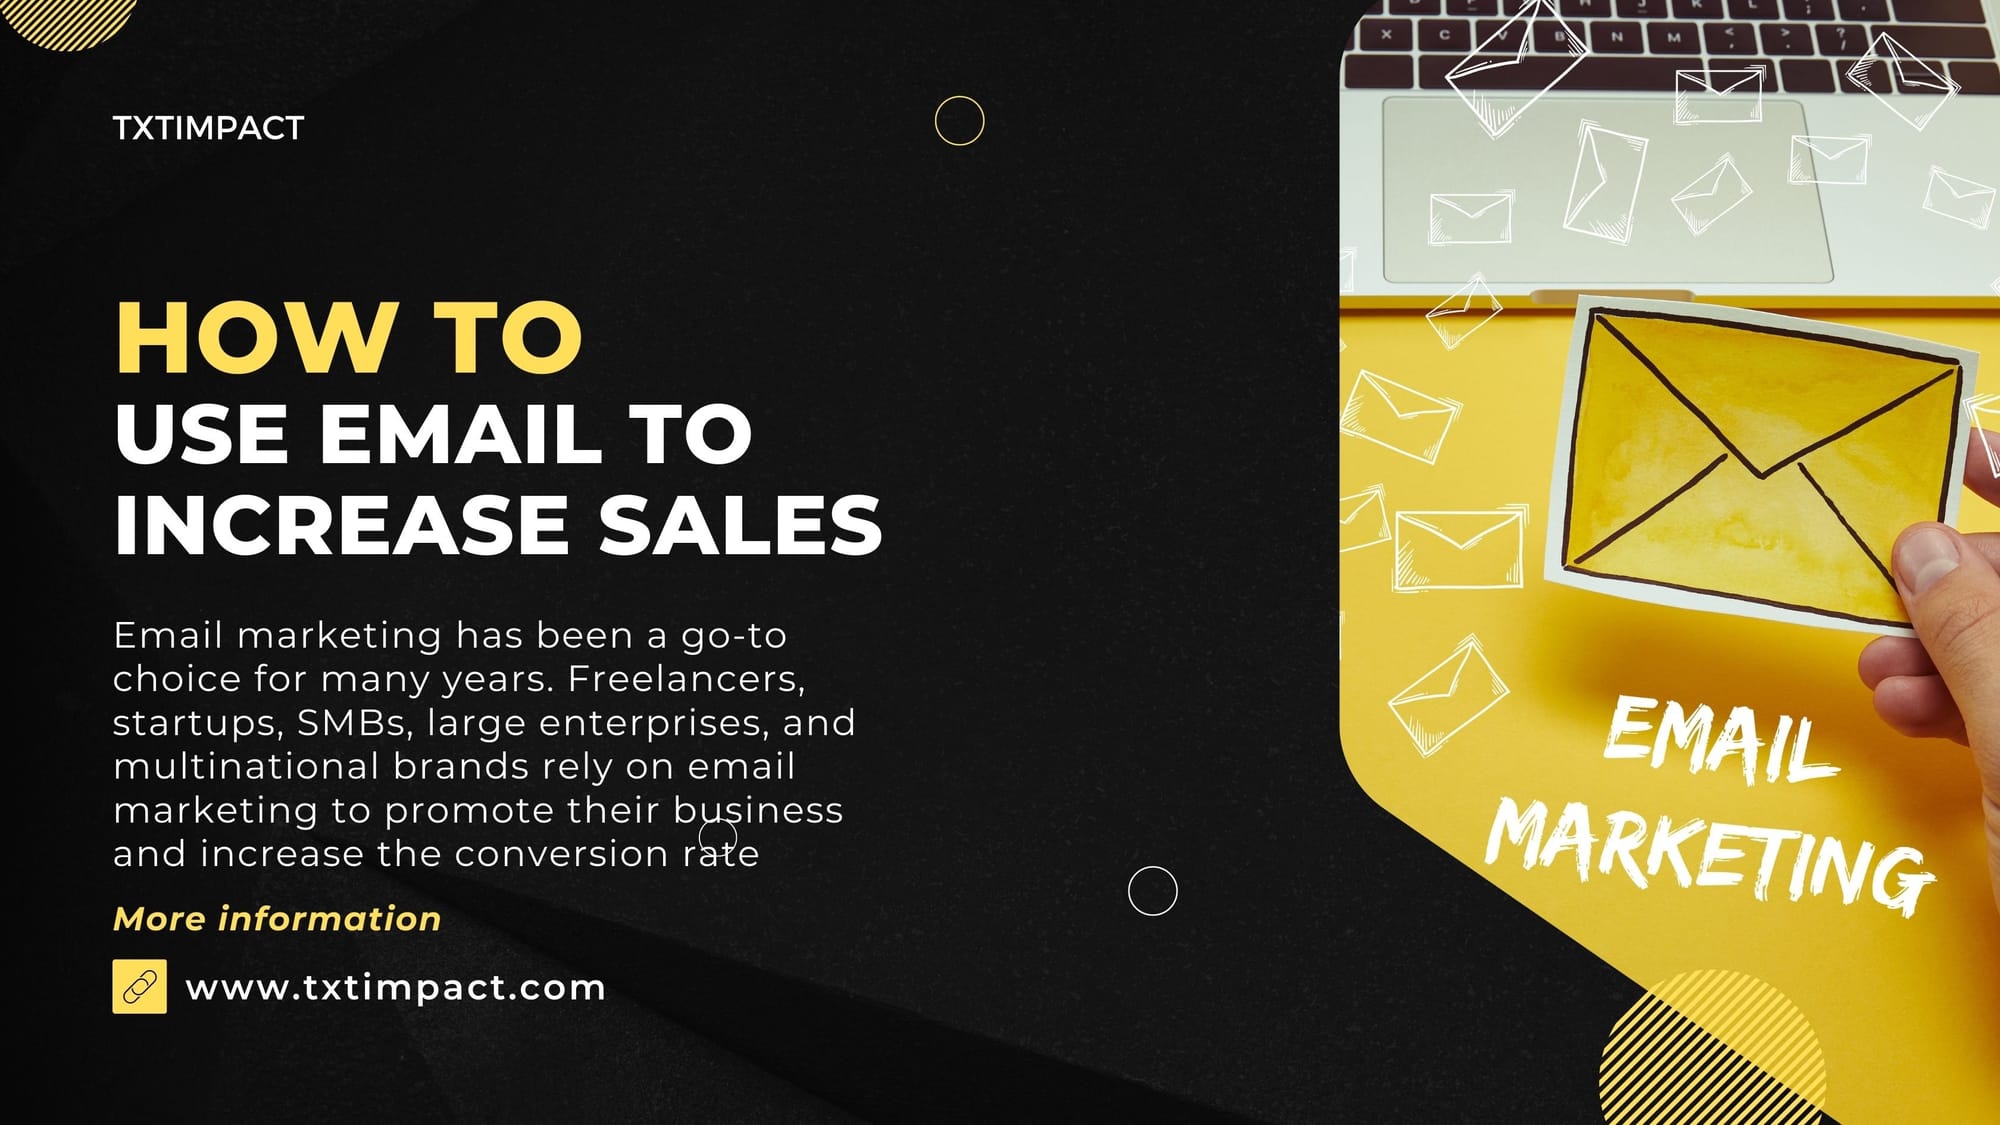 Use Email to Increase Sales.jpg